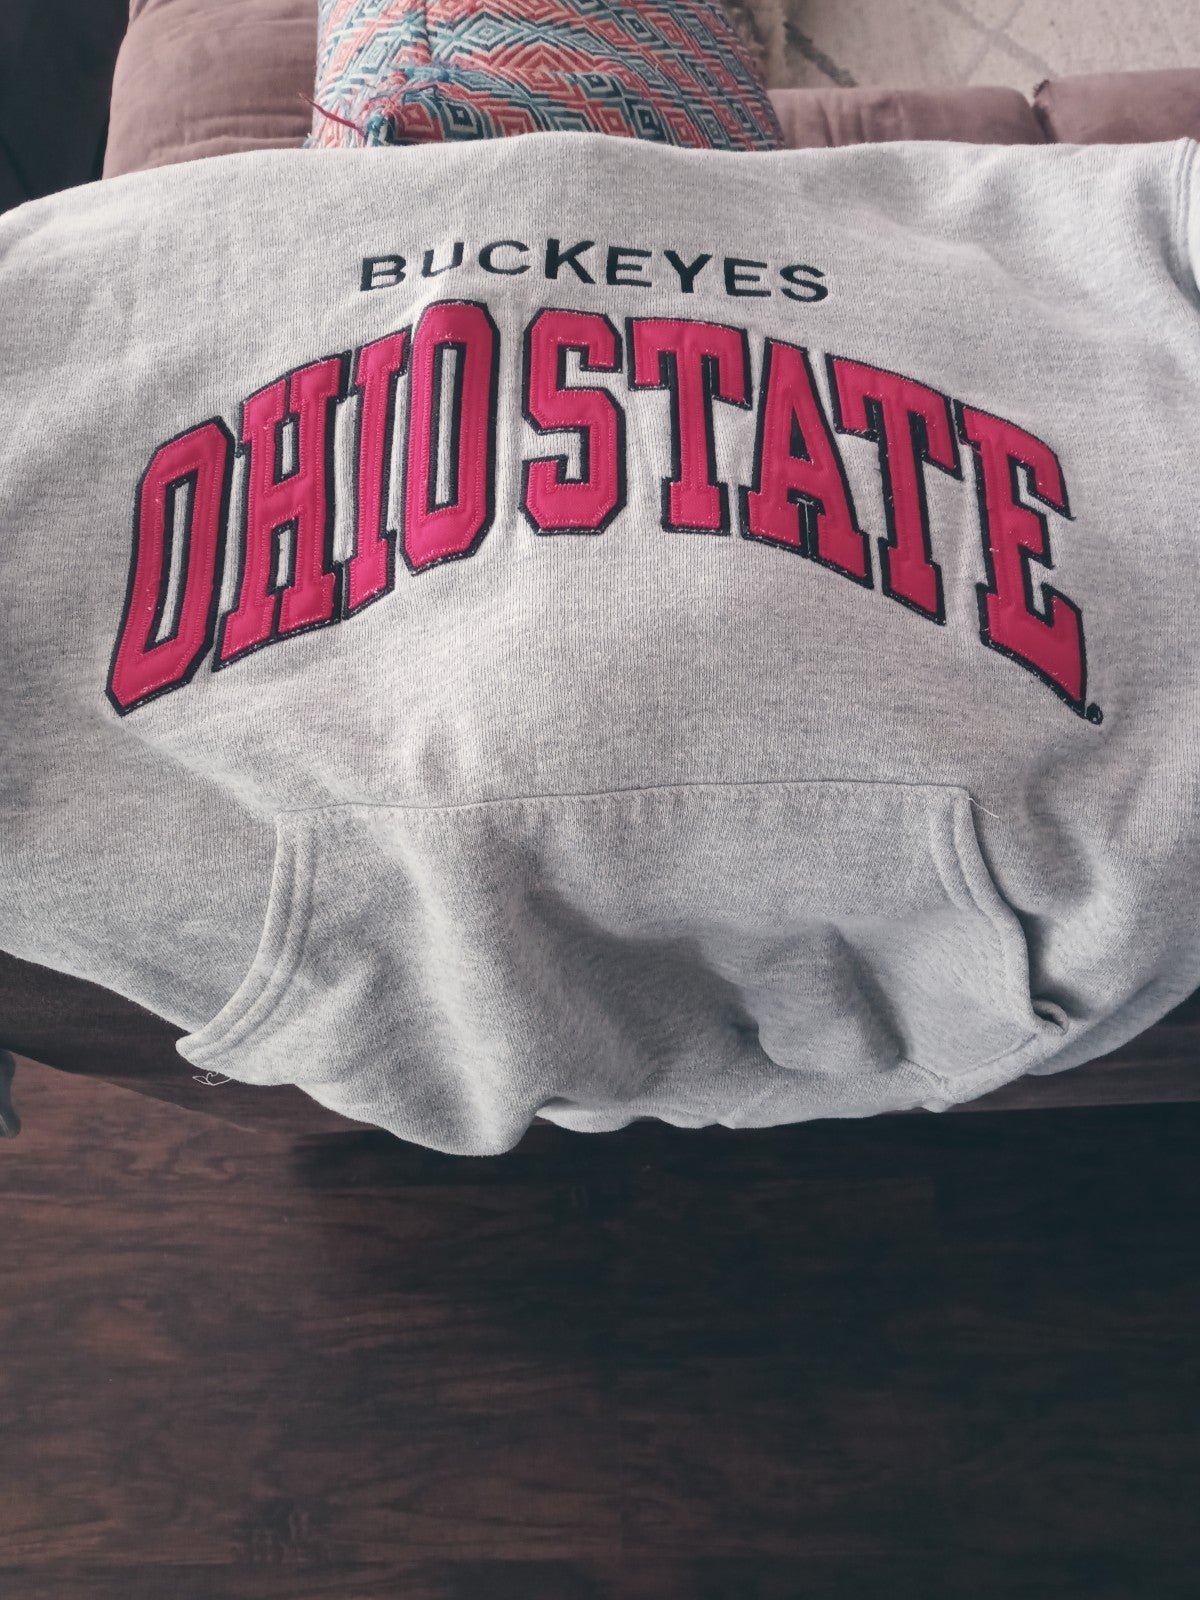 Promotions  Ohio State buckeyes hoodie gray size S LiYCQnyiR outlet online shop